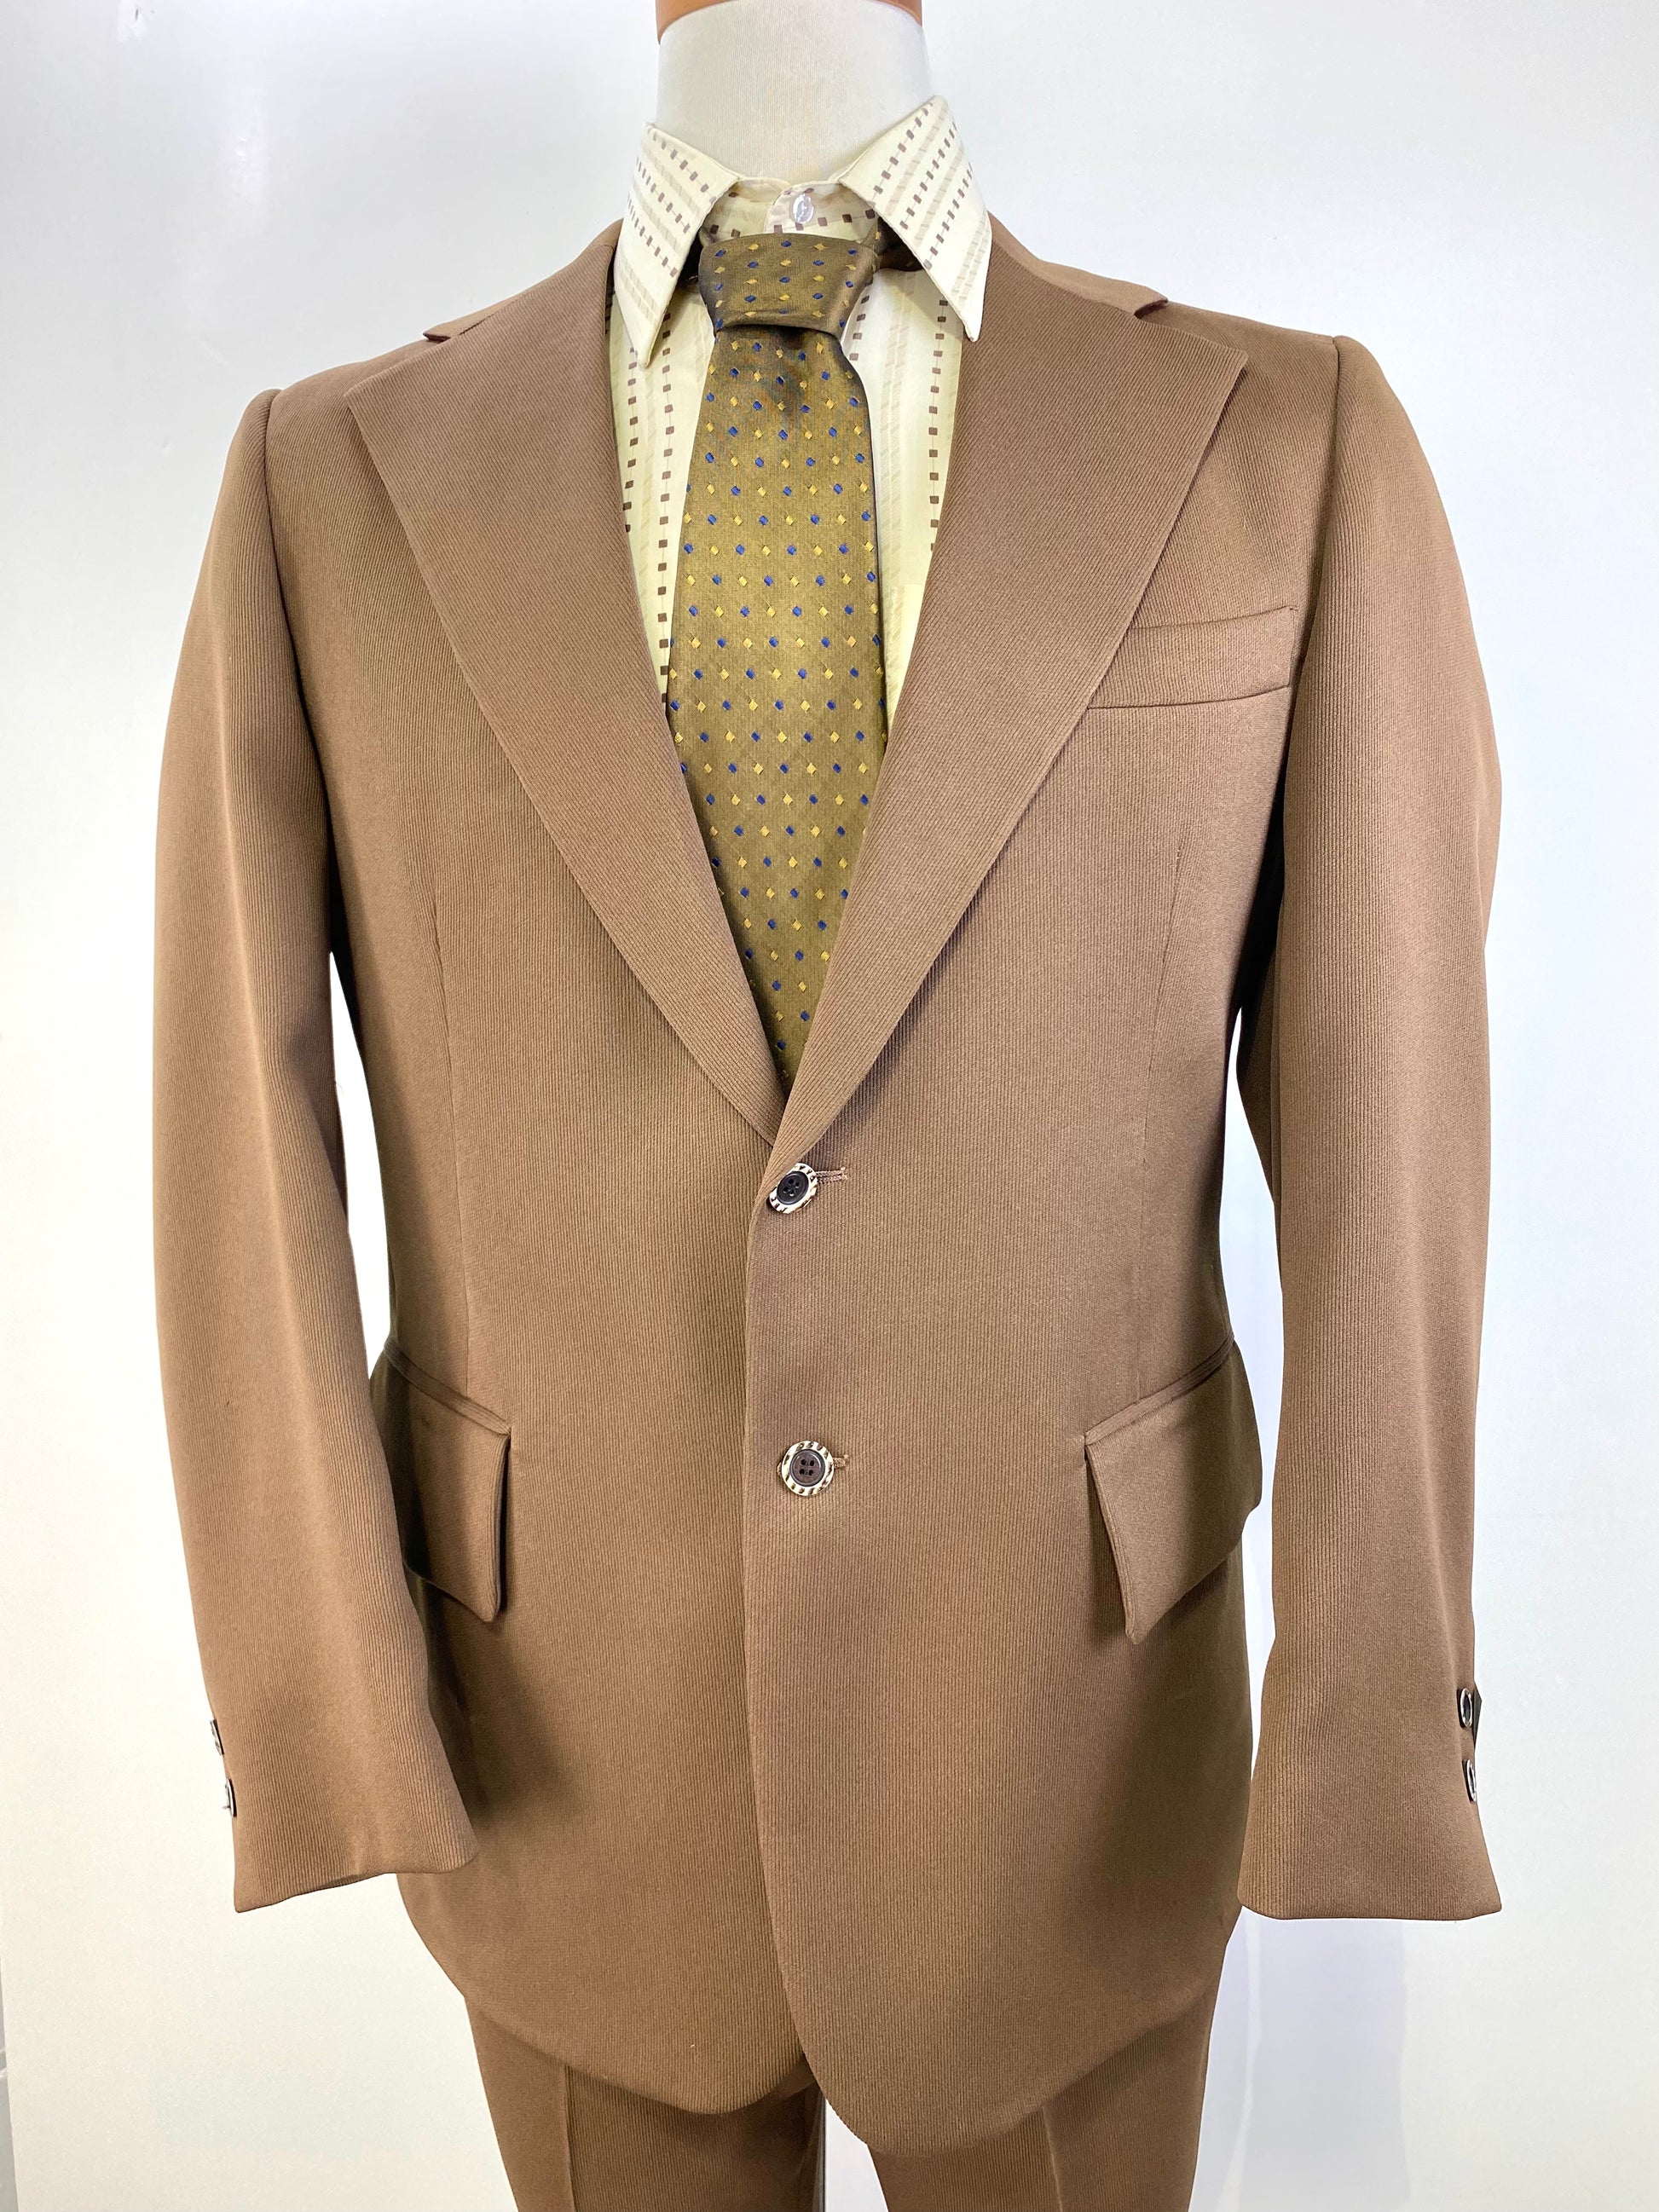 Early 1970s Vintage Deadstock Men's Suit, Brown Solid 2-Piece Poly-Twill Suit, Prestige Clothes, NOS